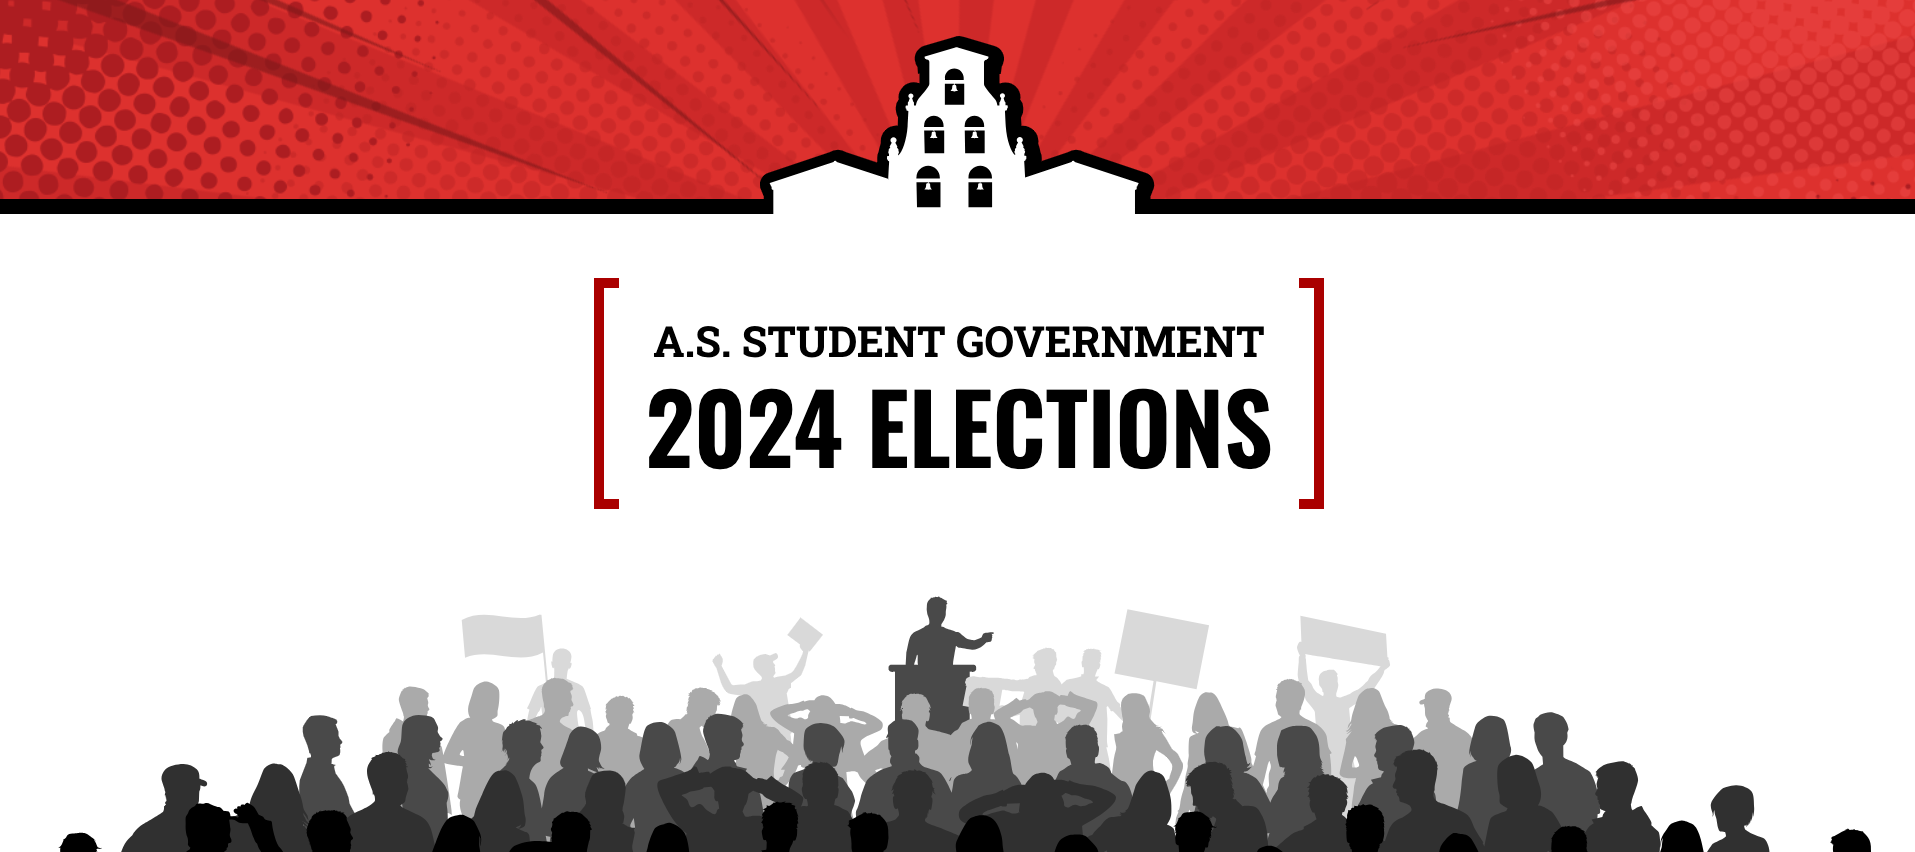 white background and silhouette of an election candidate giving a speech with crowd holding posters looking in direction of the speaker and in black uppercase text "a.s. student government 2024 elections" and Hepner Hall vector artwork above that